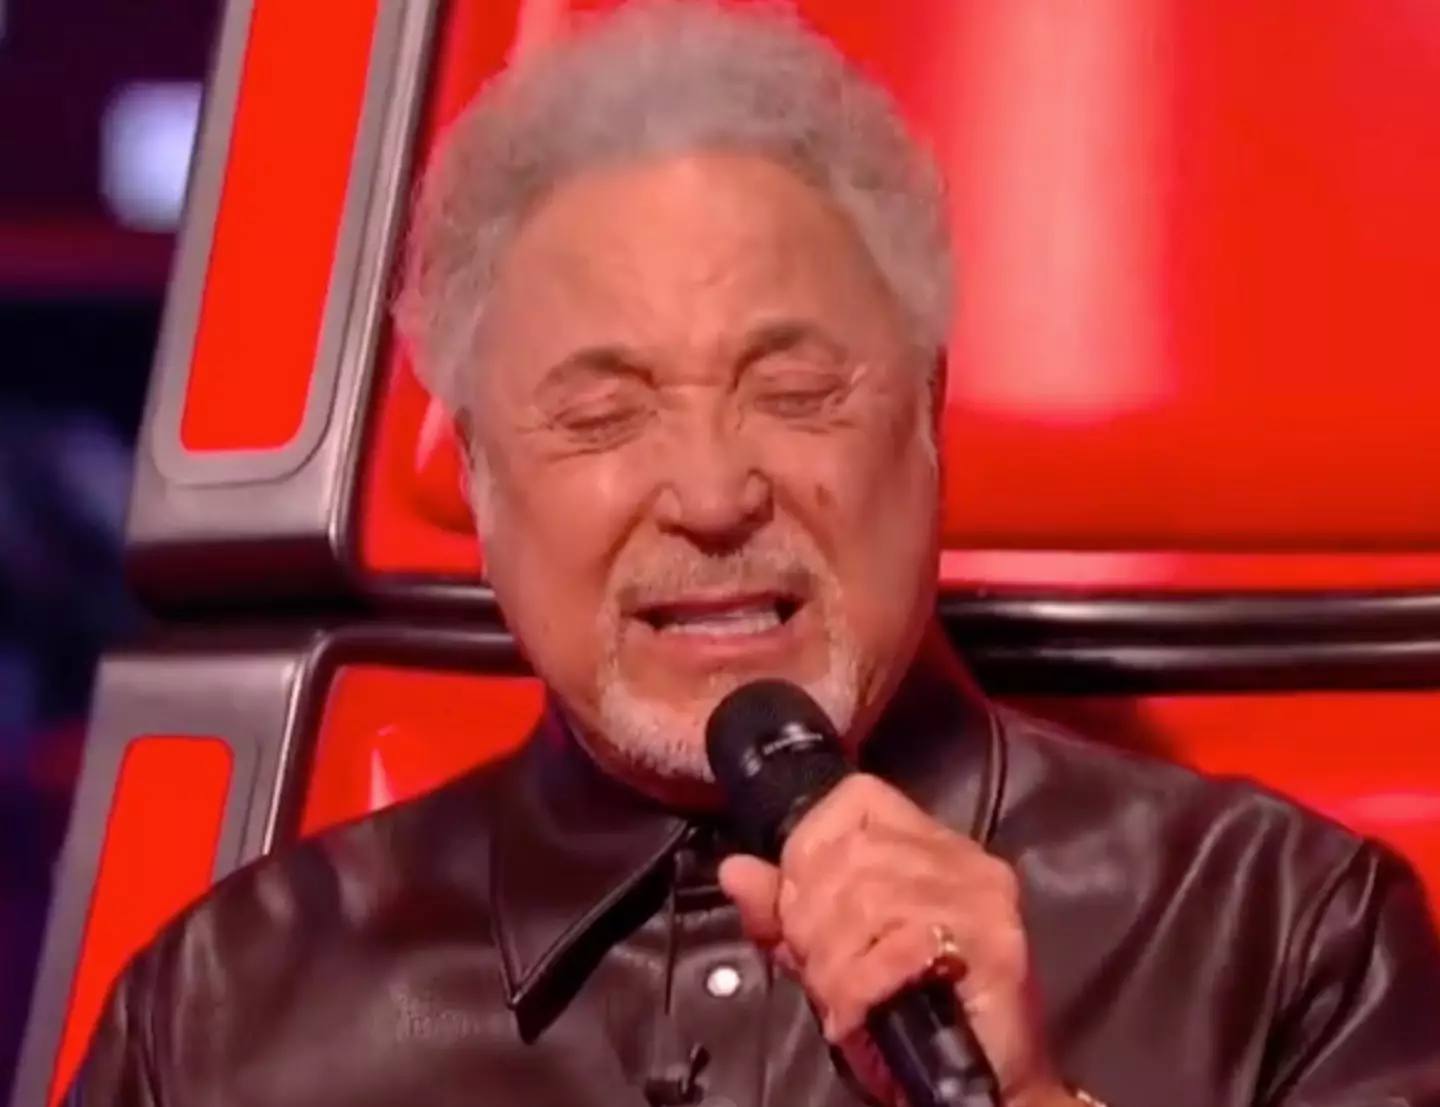 Tom Jones gave an emotional rendition of a song dedicated to his wife.